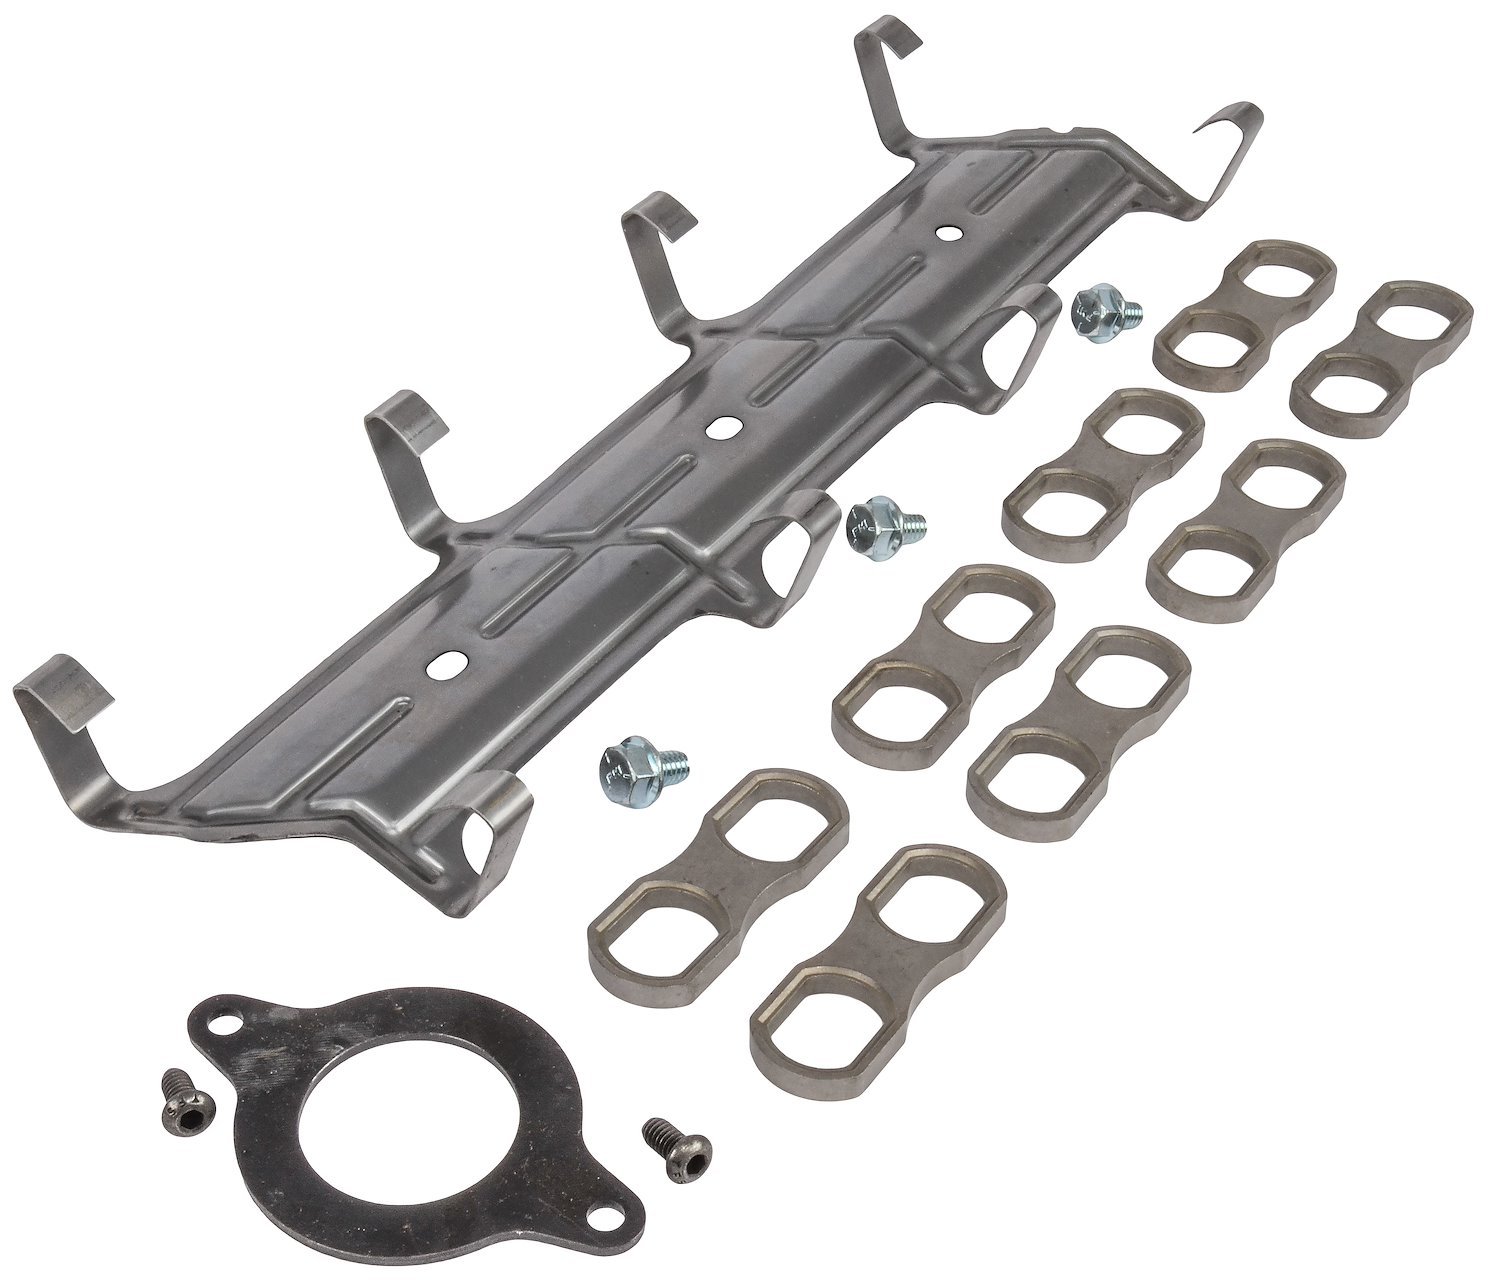 Roller Lifter Retainer Kit for 1986-1990 Small Block